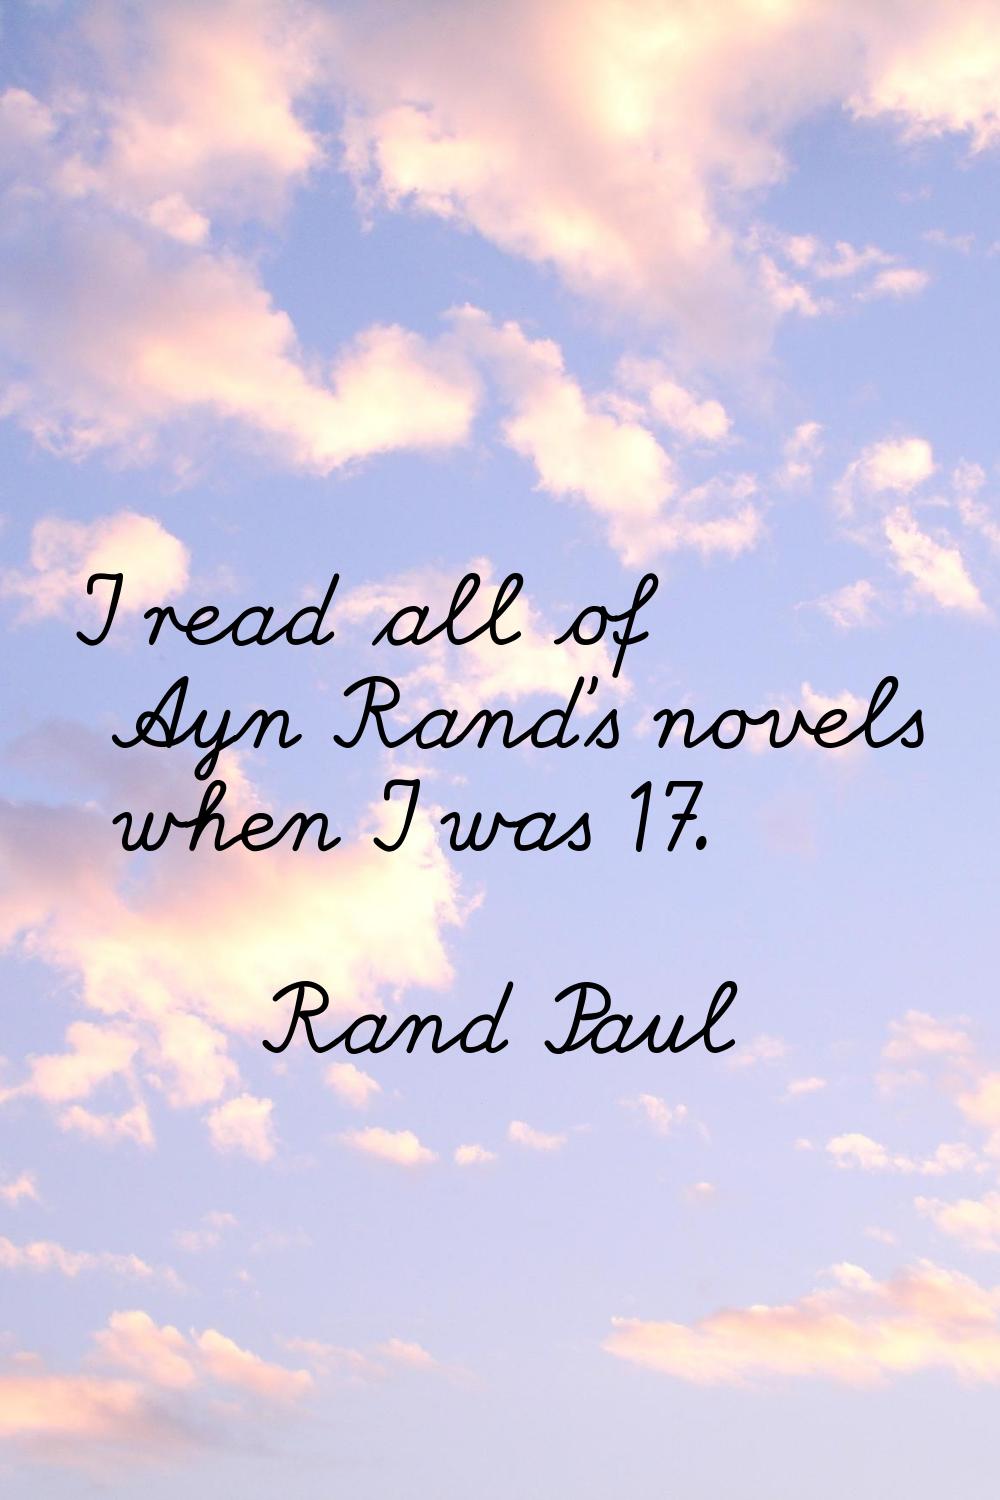 I read all of Ayn Rand's novels when I was 17.